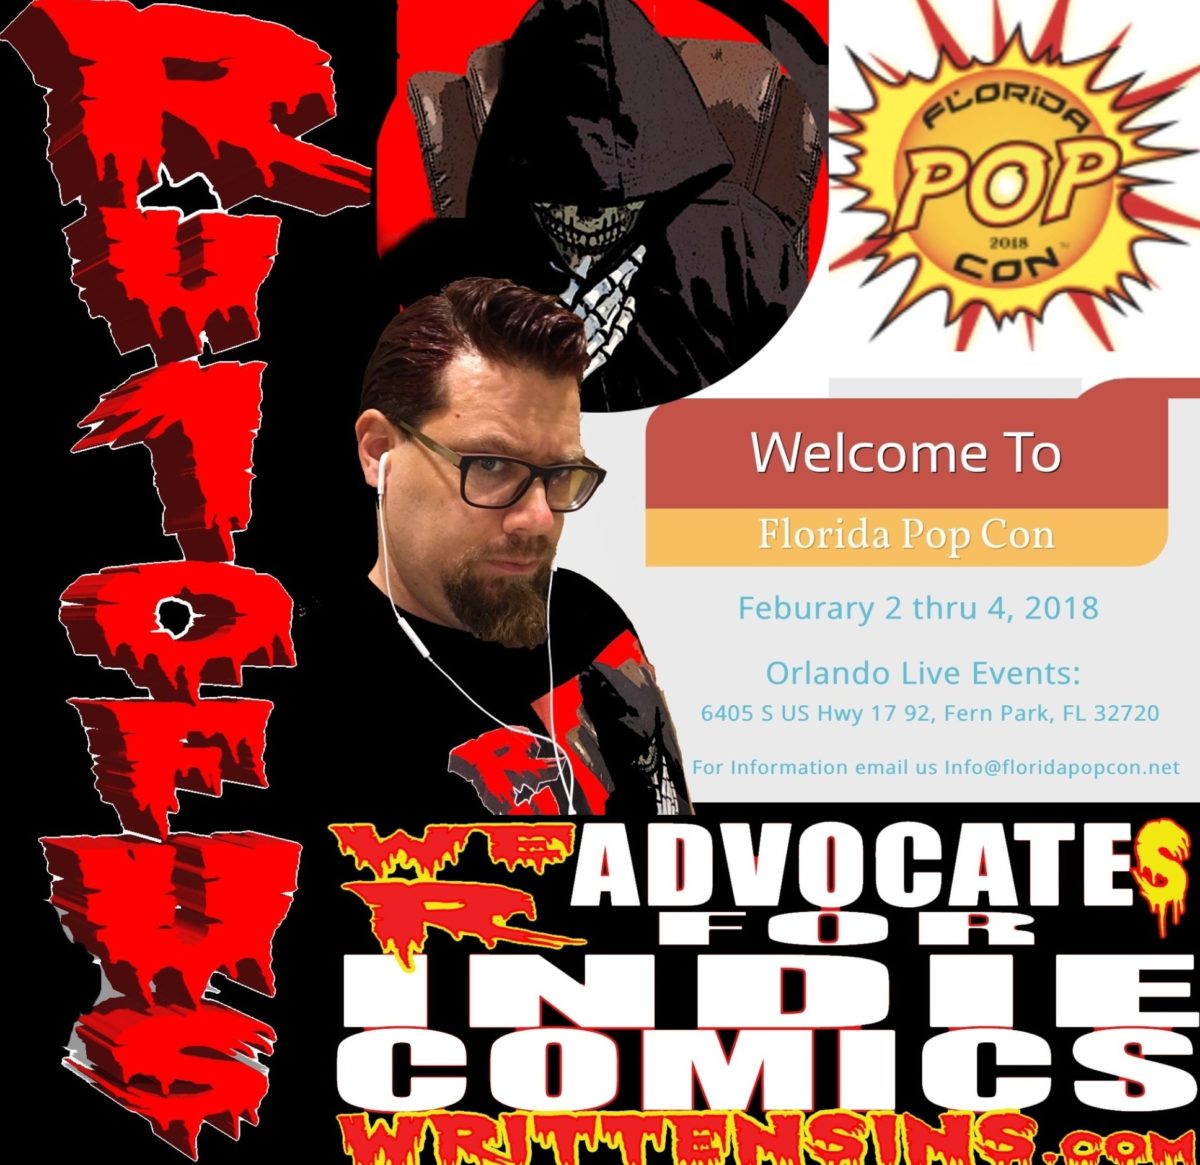 (FL) Mr Andersin  and WrittenSiNs head to what Popping in Florida Feb. 2-4 at  the  POP CON